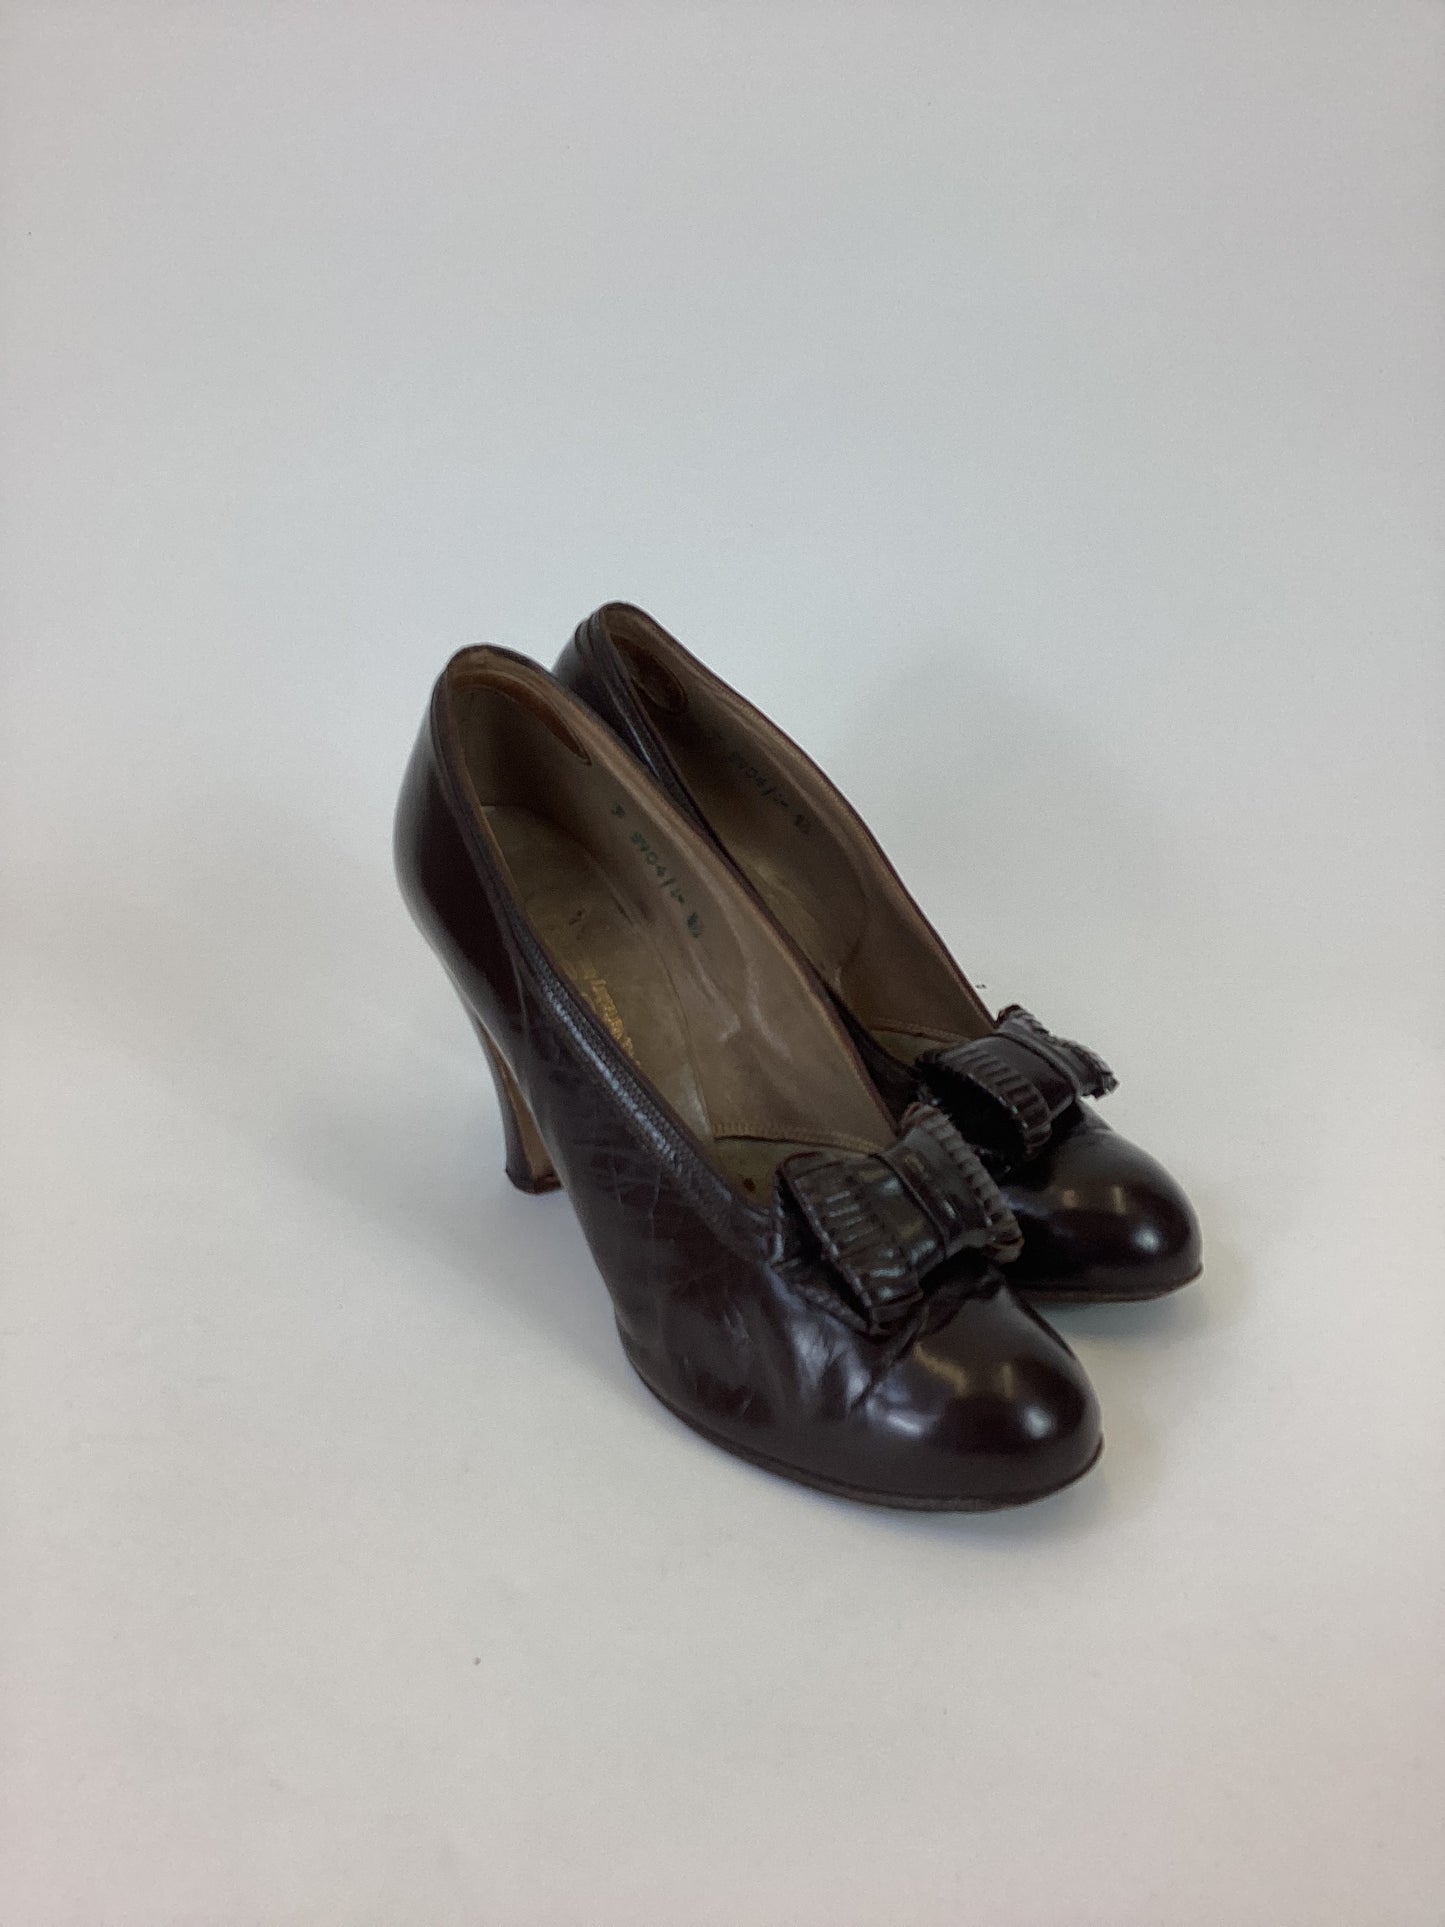 Original 30's / 40's Spectacular High heeled shoes - Rich Brown